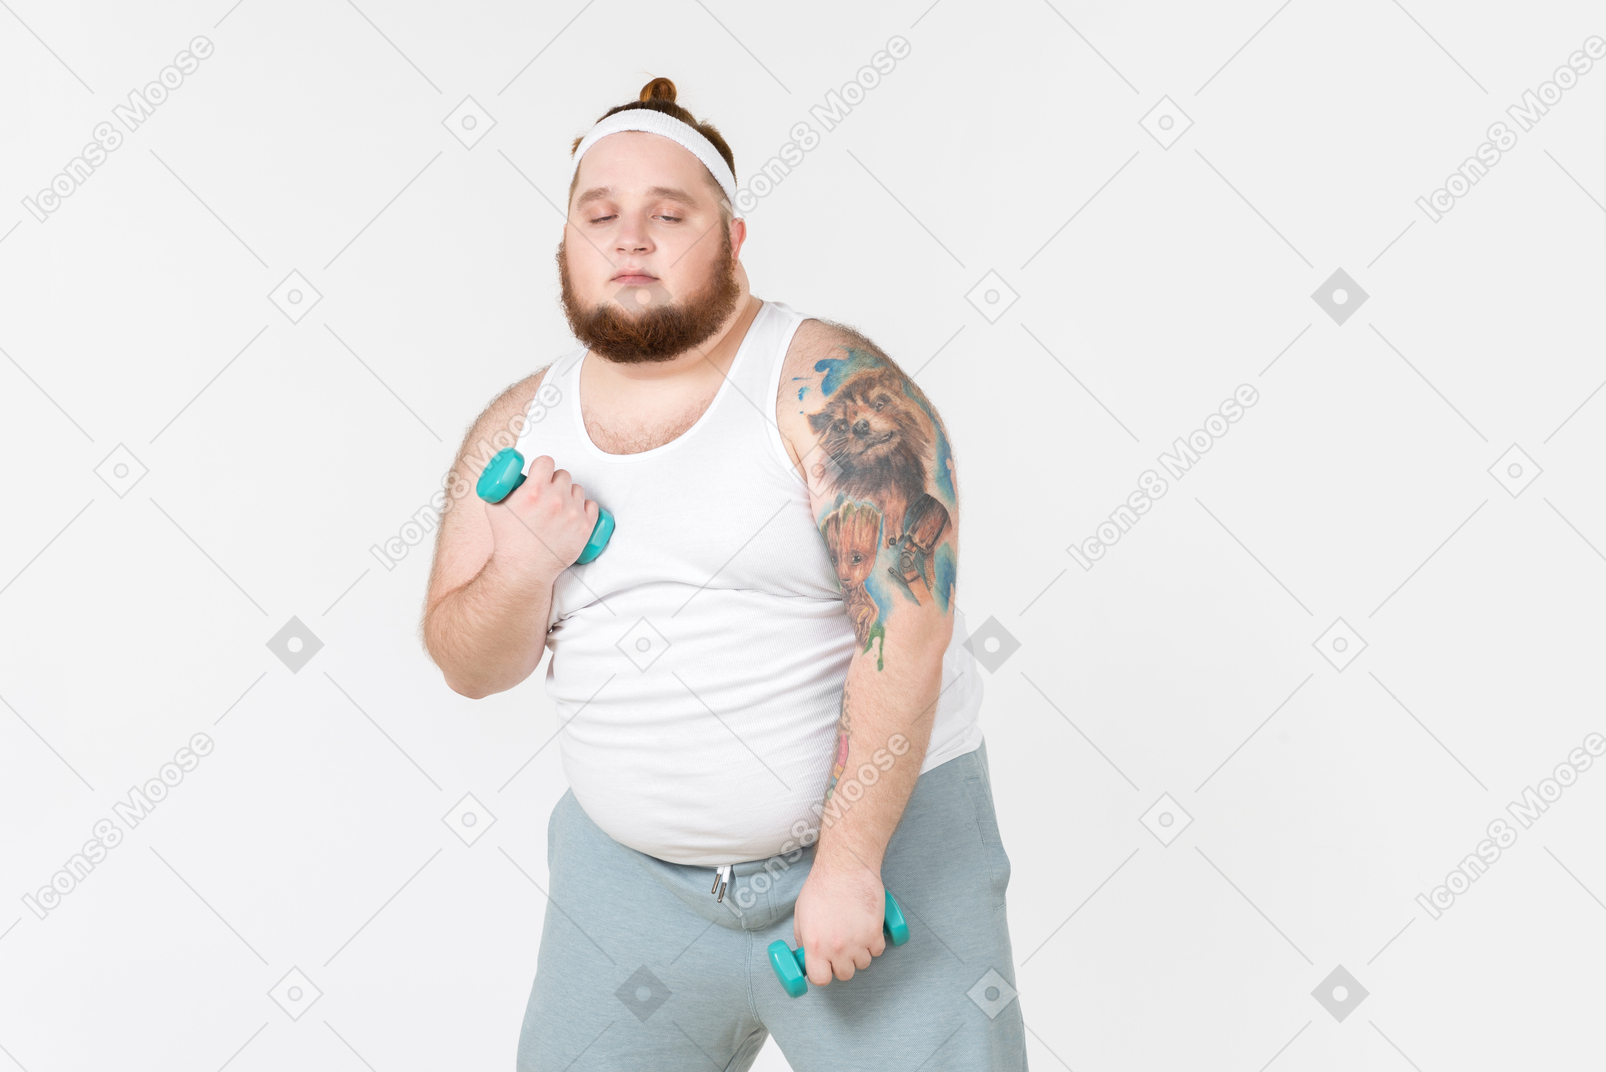 Tired big guy in sportswear lifting hand weights